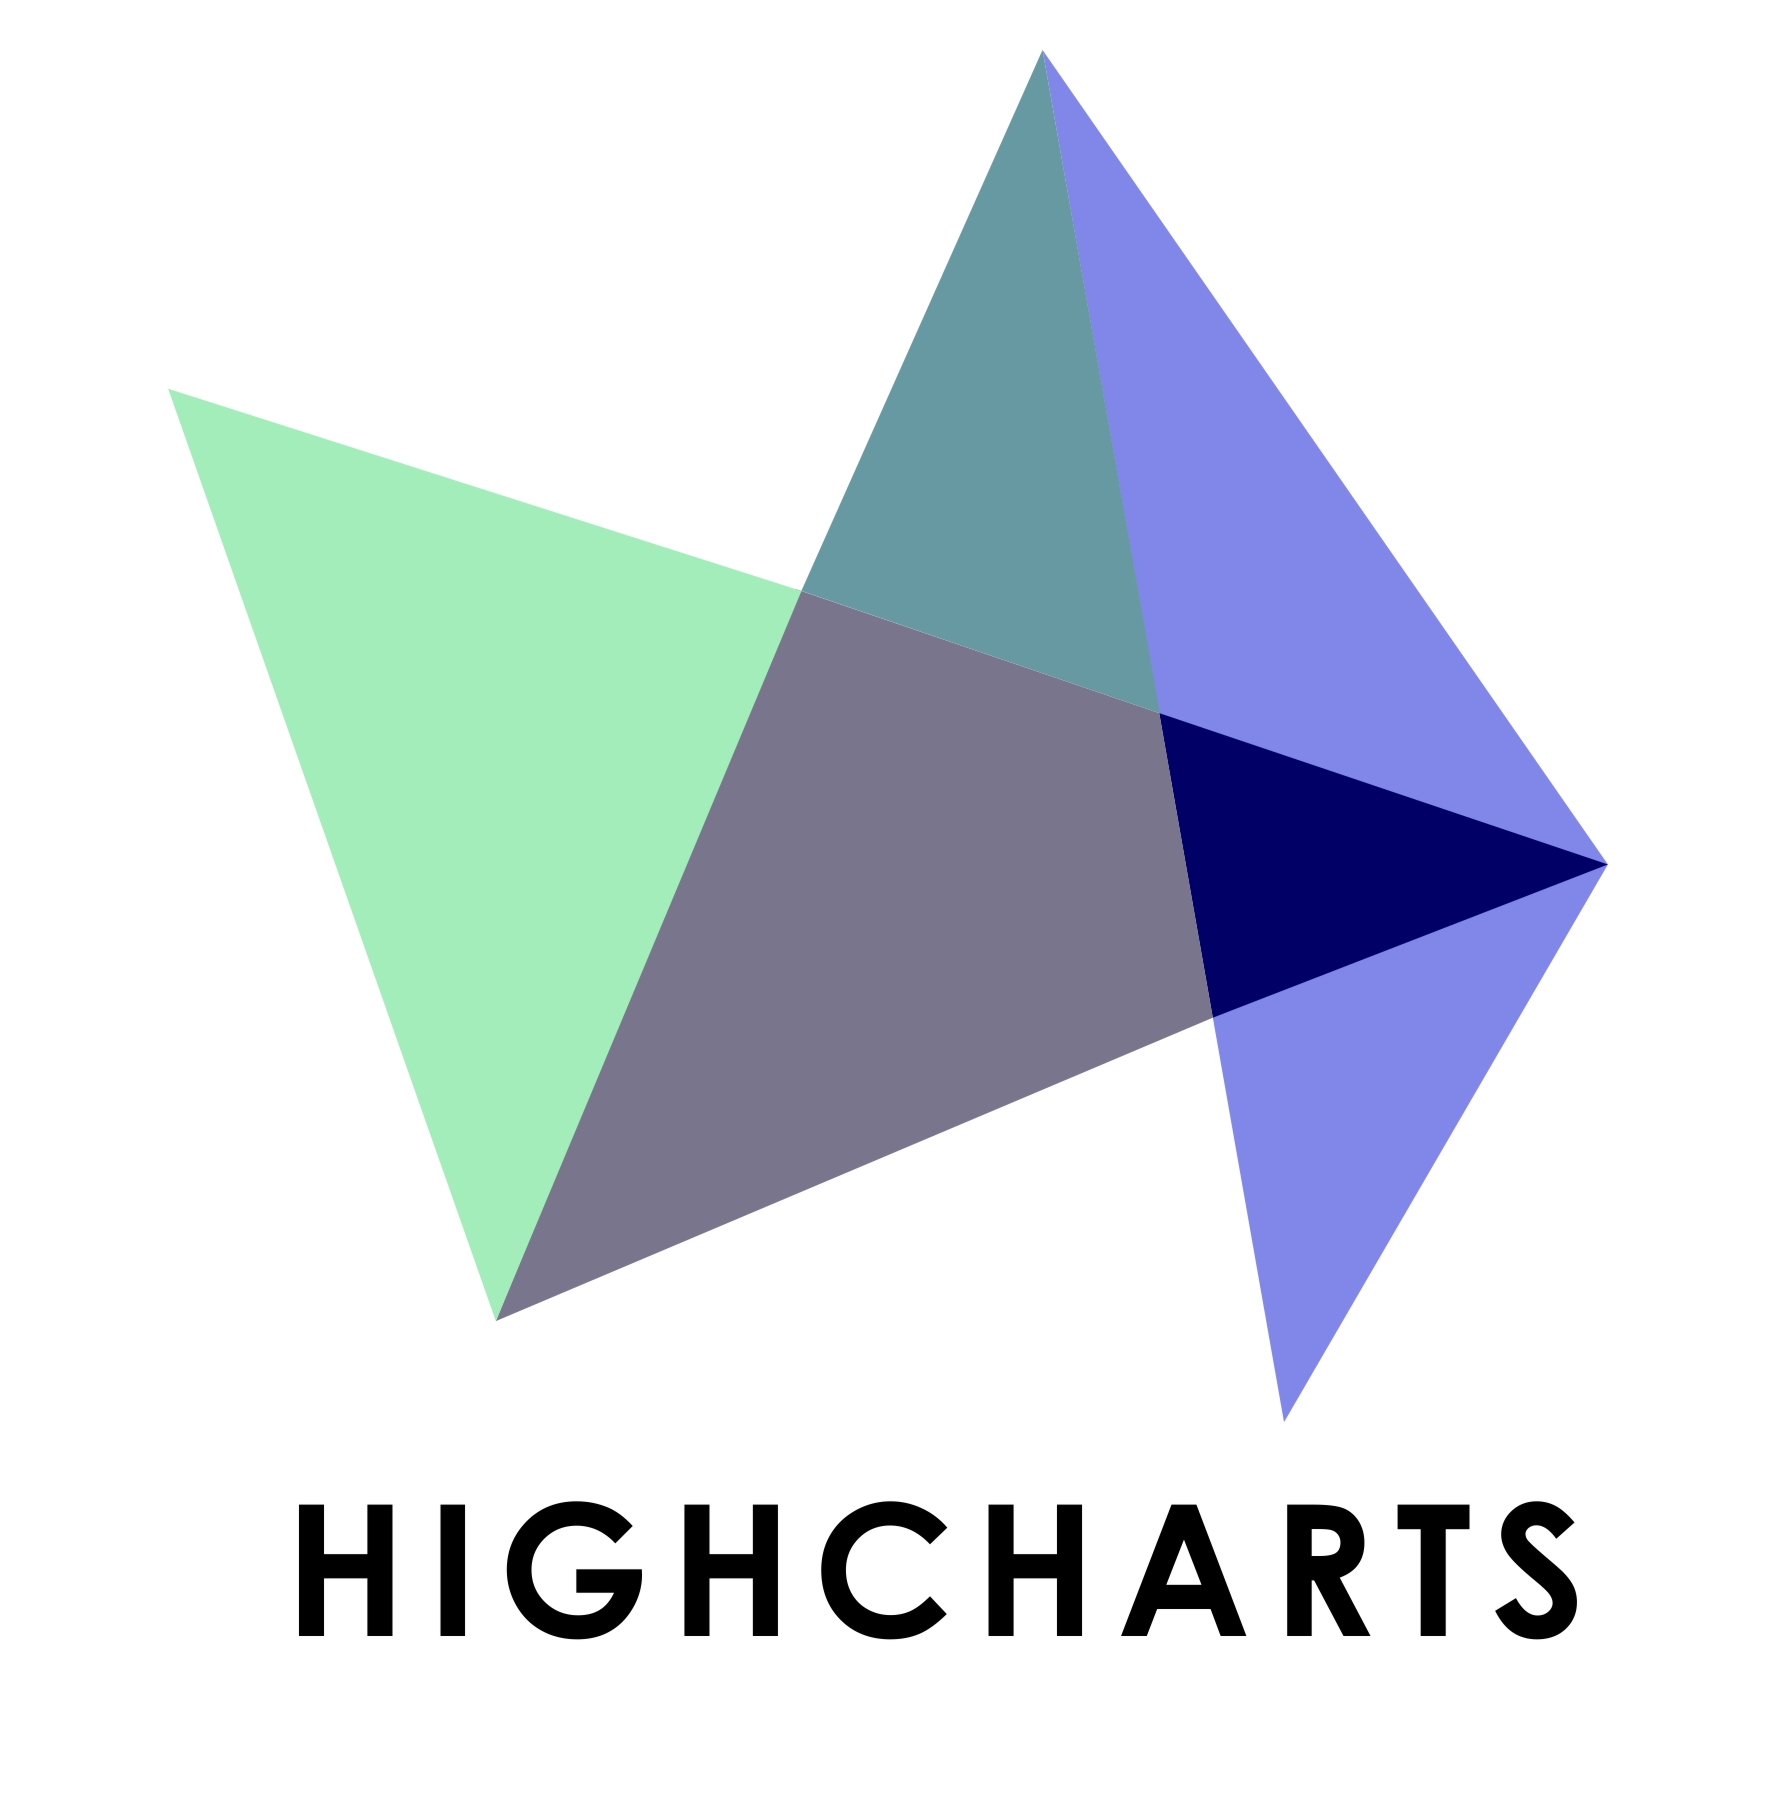 How to use Highcharts Drupal 7 module - Steps to create charts using ...